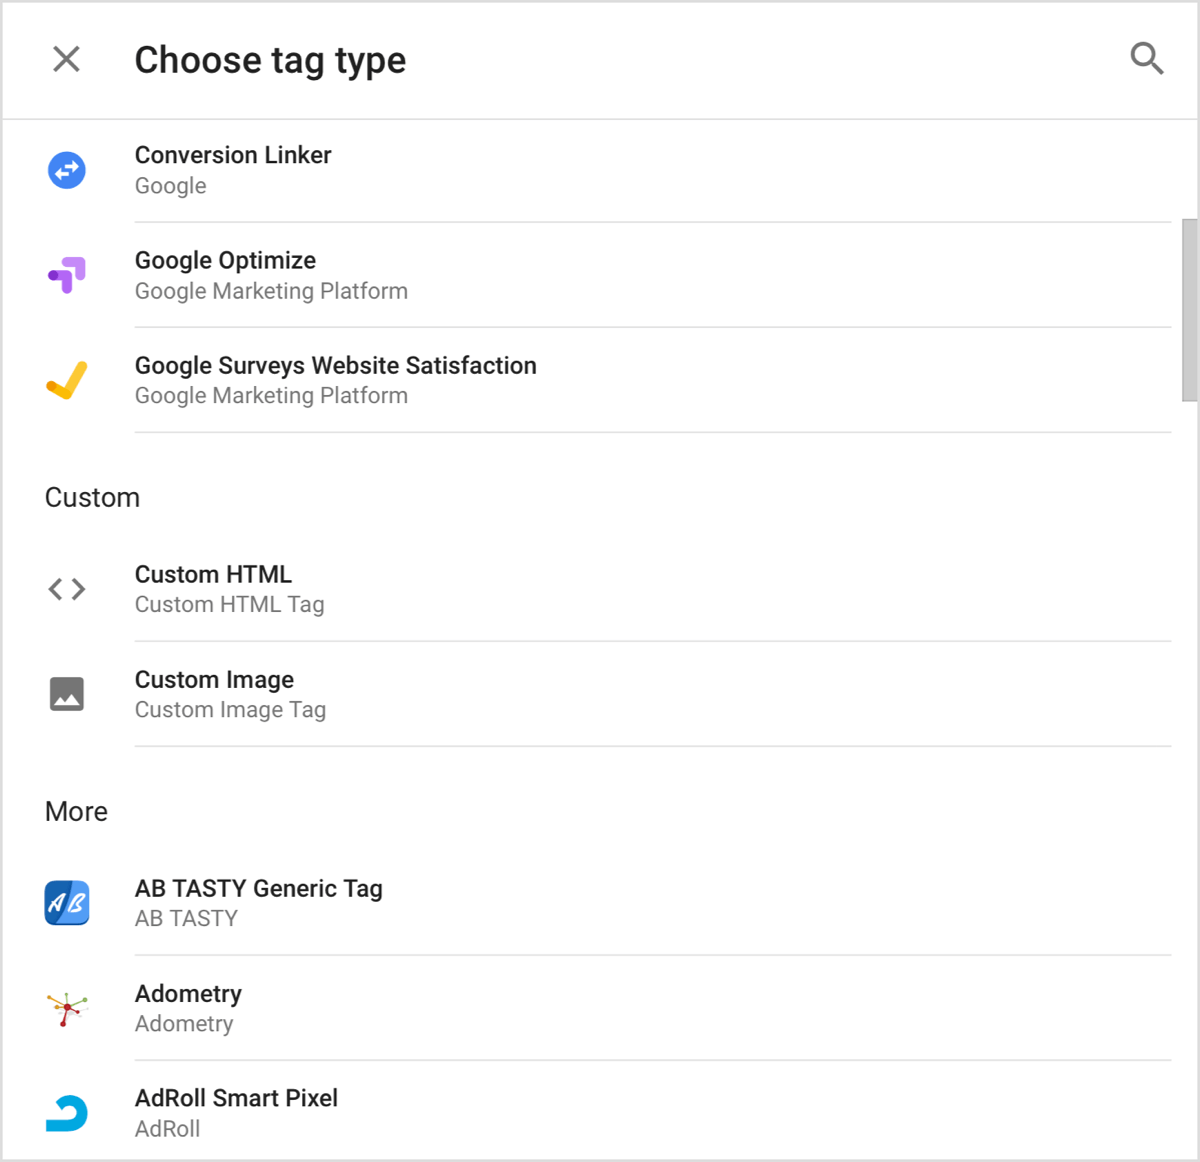 Choose the type of tag you want to add to Google Tag Manager.